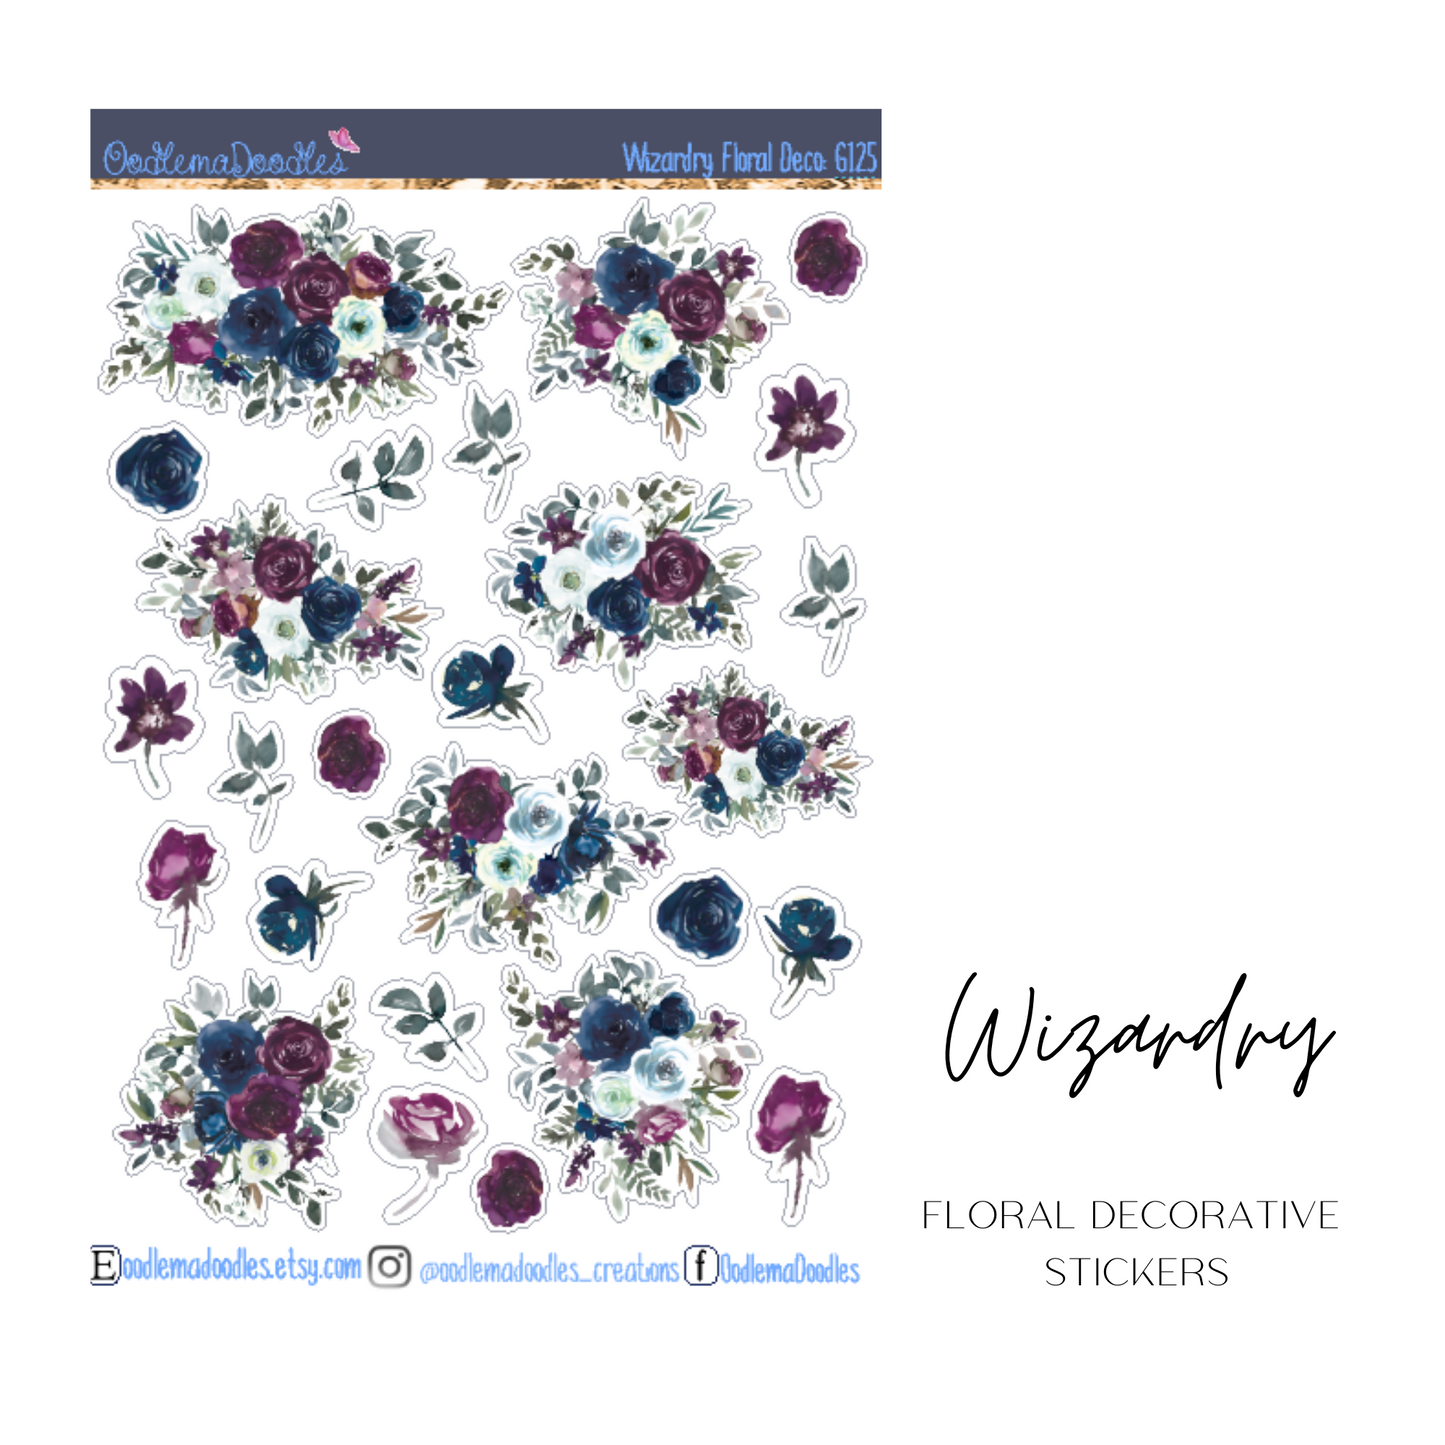 Wizardry Floral Decorative Stickers